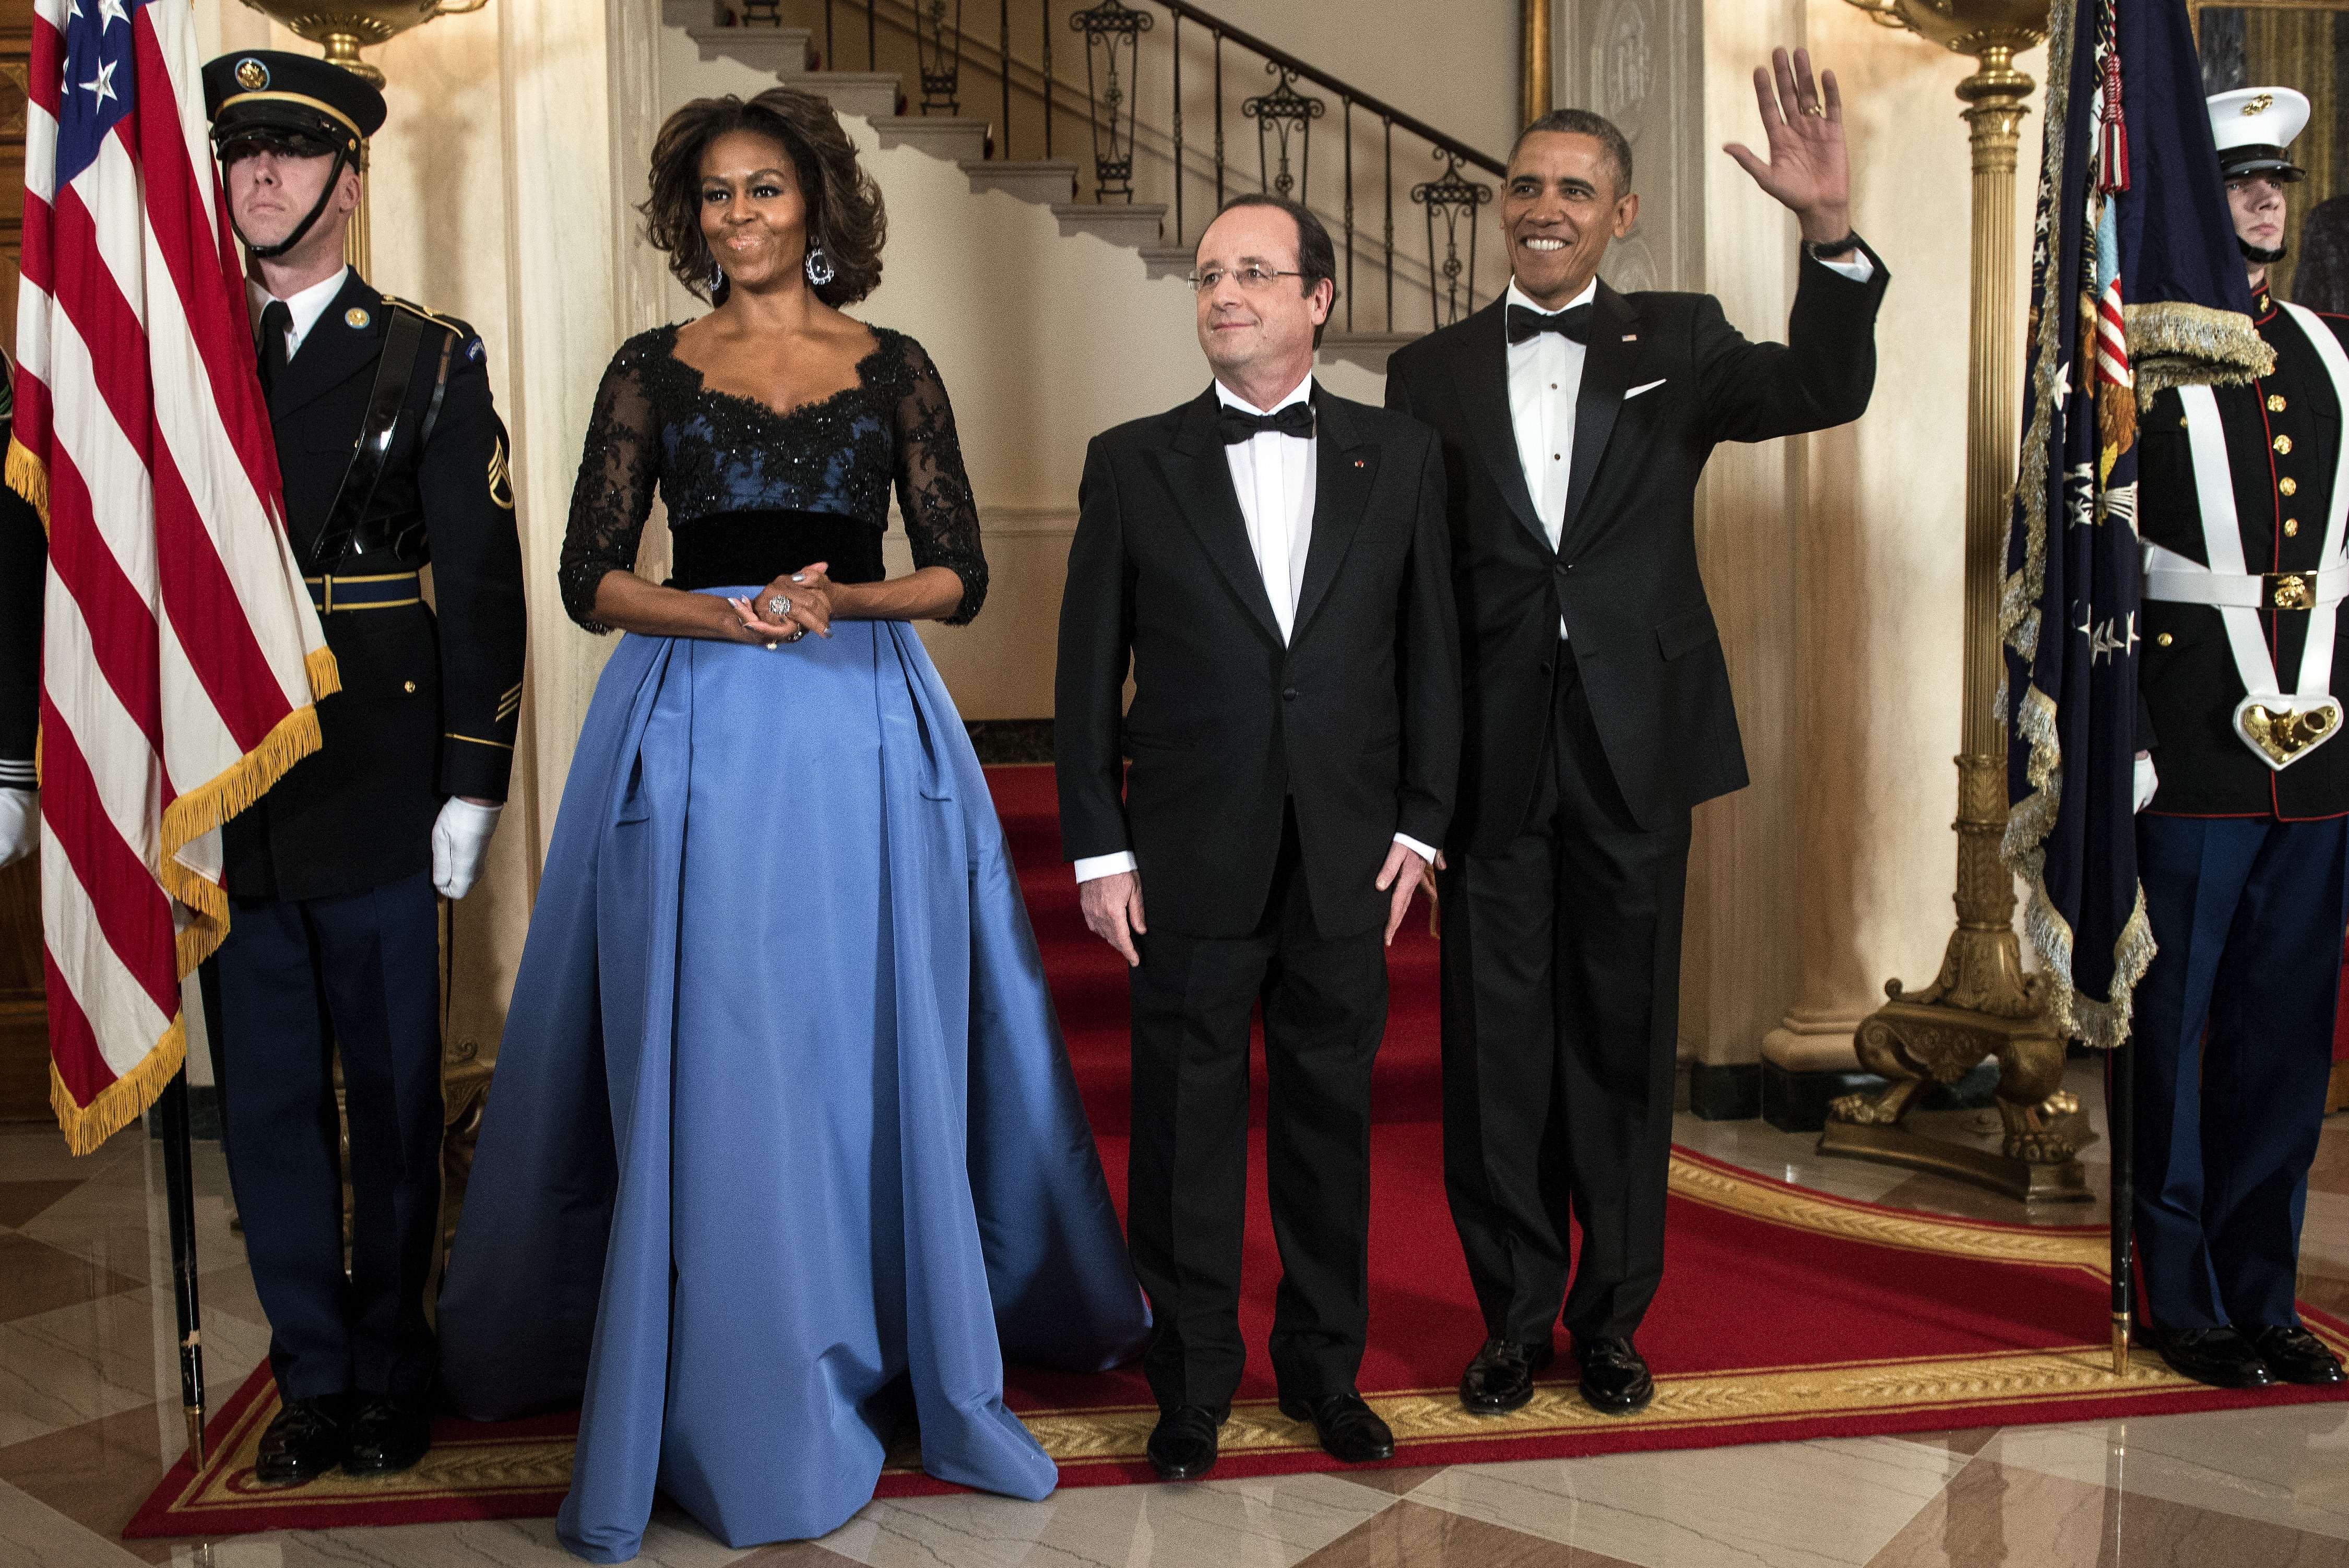 First Lady Michelle Obama, French President Francois Hollande and President Barack Obama pose in front of the Grand Staircase for an official photo before a State Dinner at the White House February 11, 2014 in Washington. (Brendan Smialowski—AFP/Getty Images)